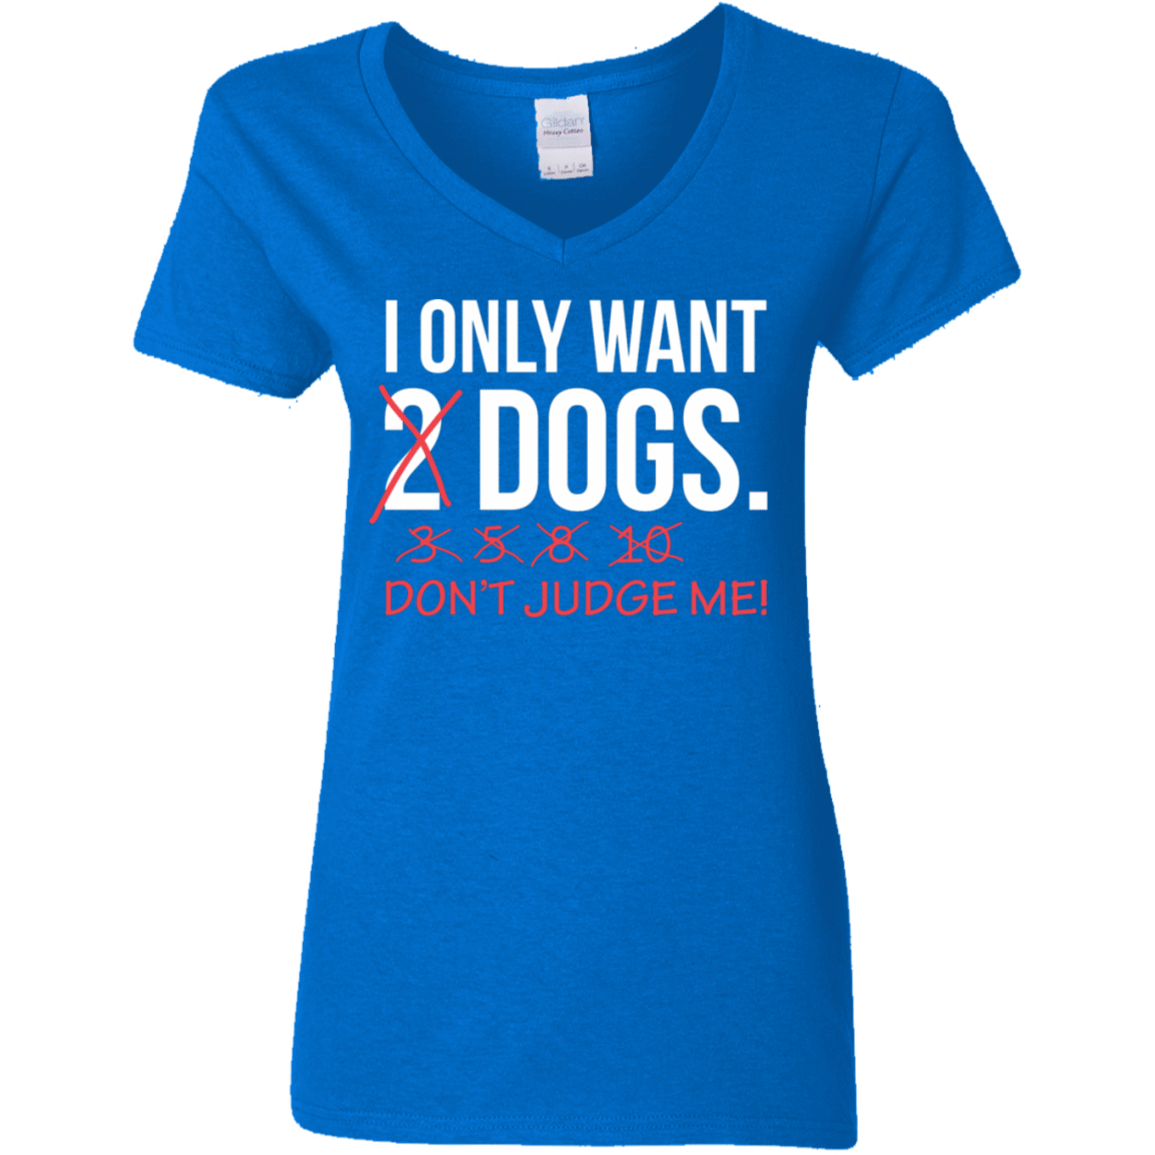 I Only Want 2 Dogs - Ladies V Neck.